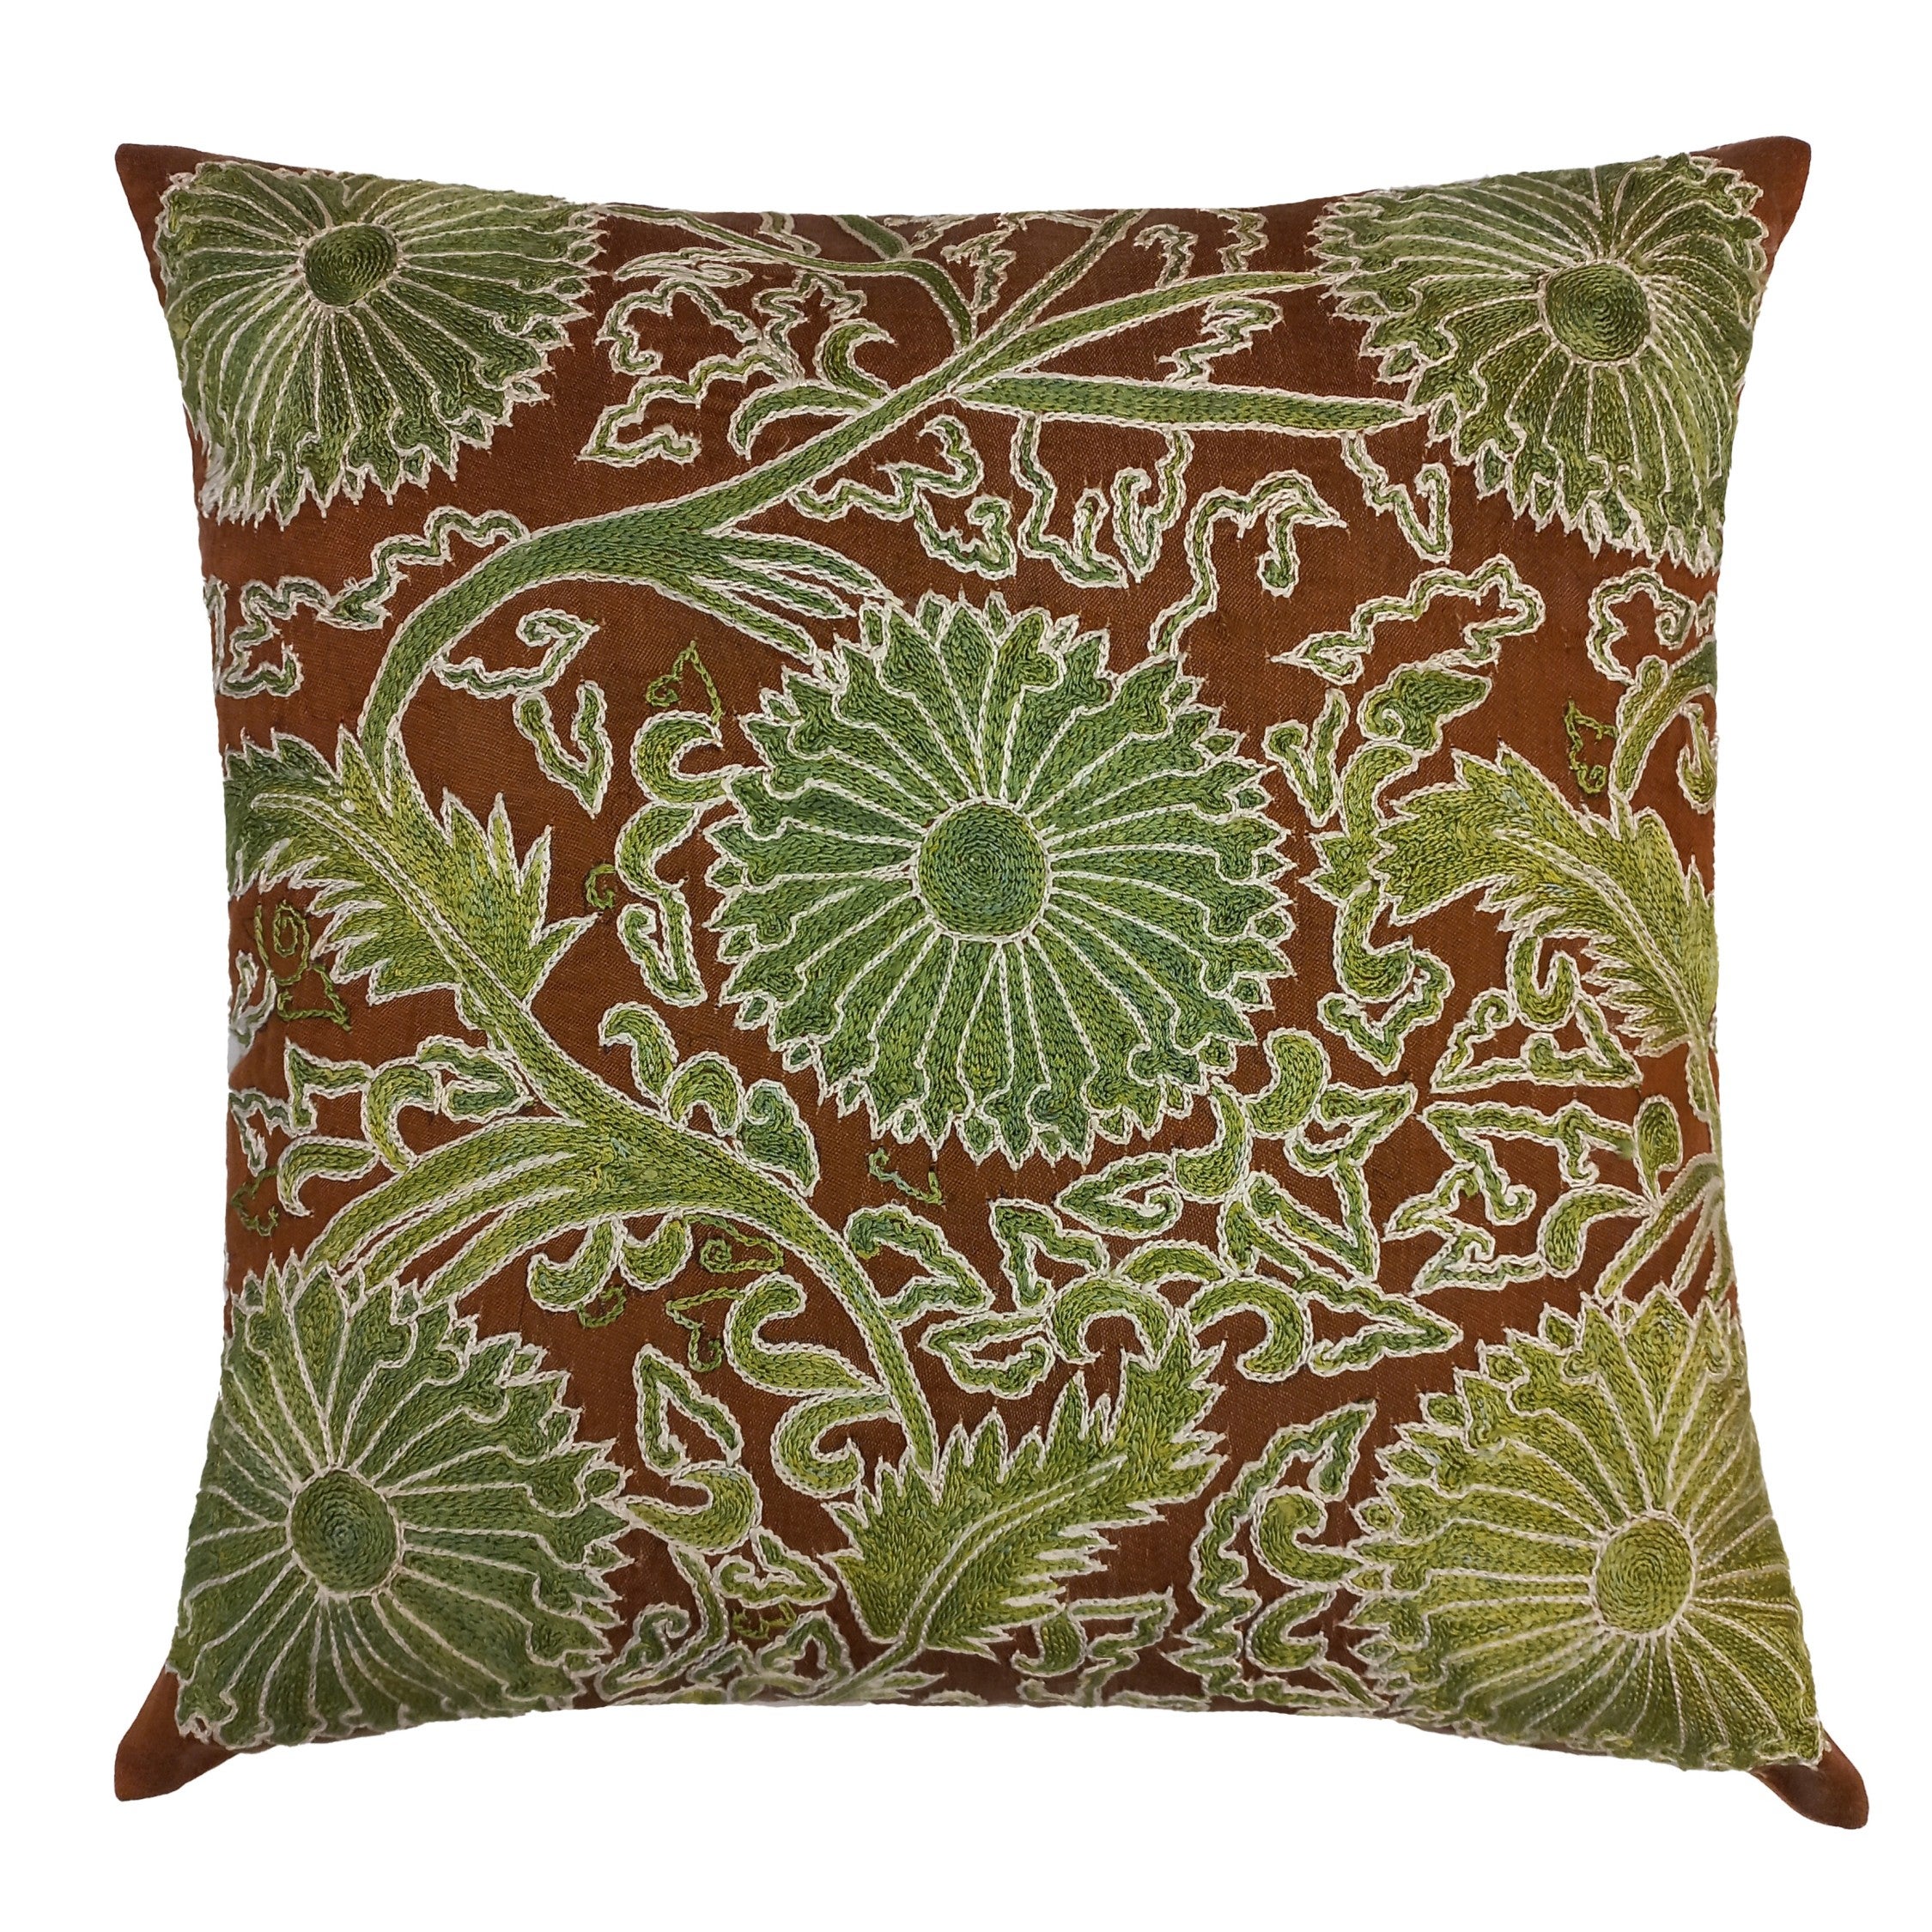 19"x19" Brown & Green Cushion Cover Made of 100% Silk, Embroidered Throw Pillow For Sale